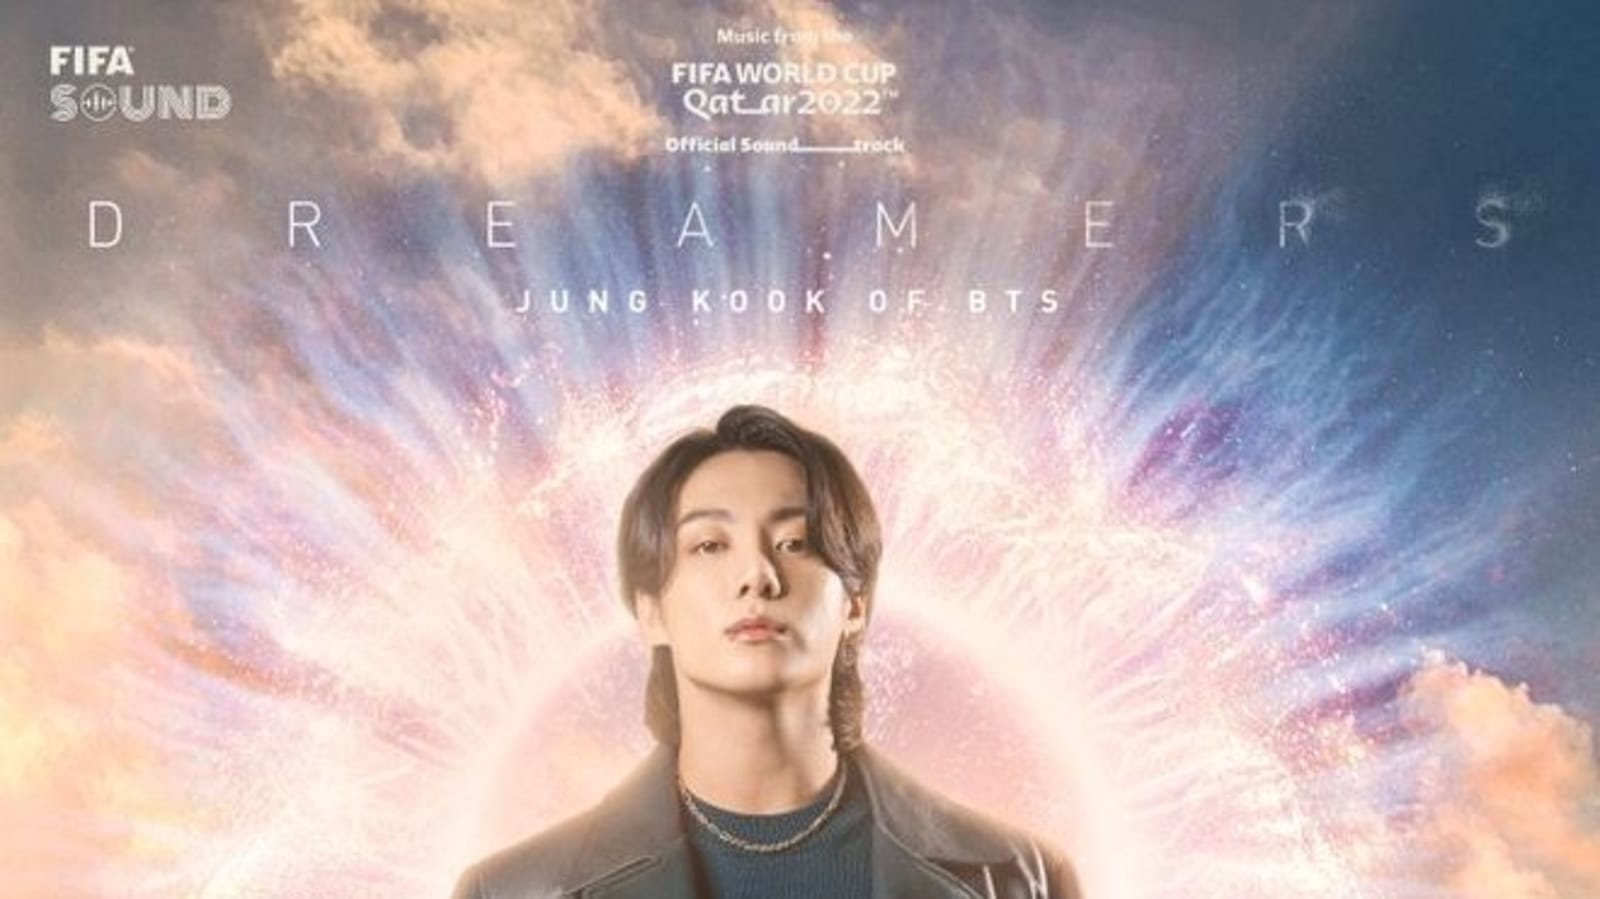 BTS Jungkook to perform Dreamers at FIFA World Cup opening ceremony